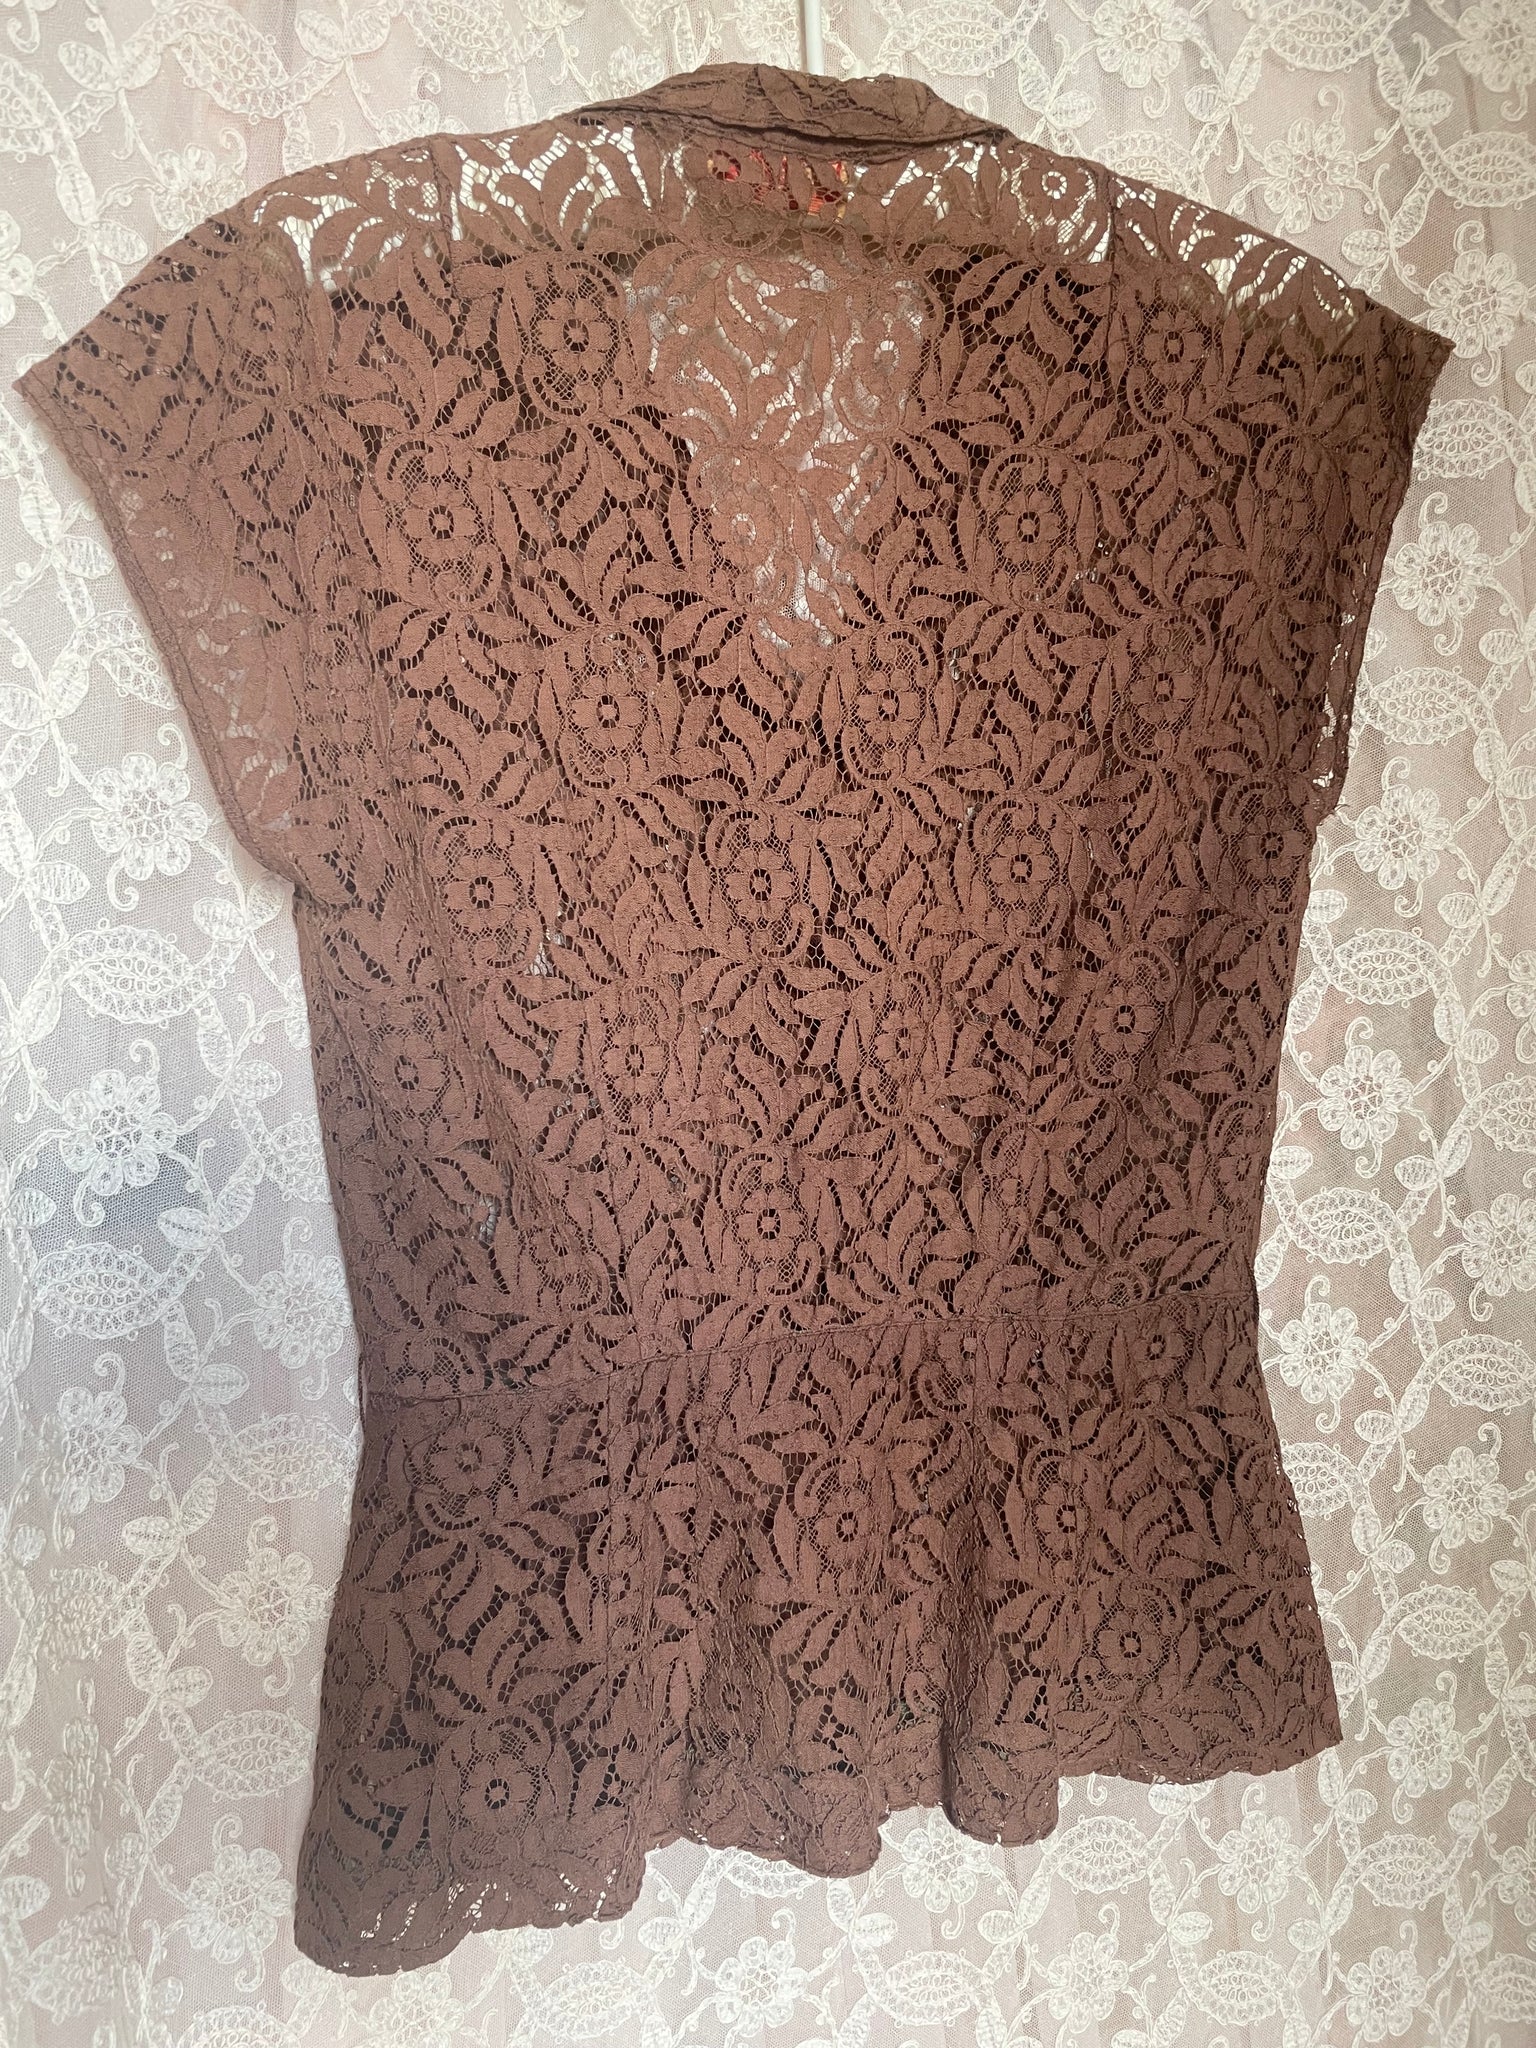 1940s Brown Lace Blouse